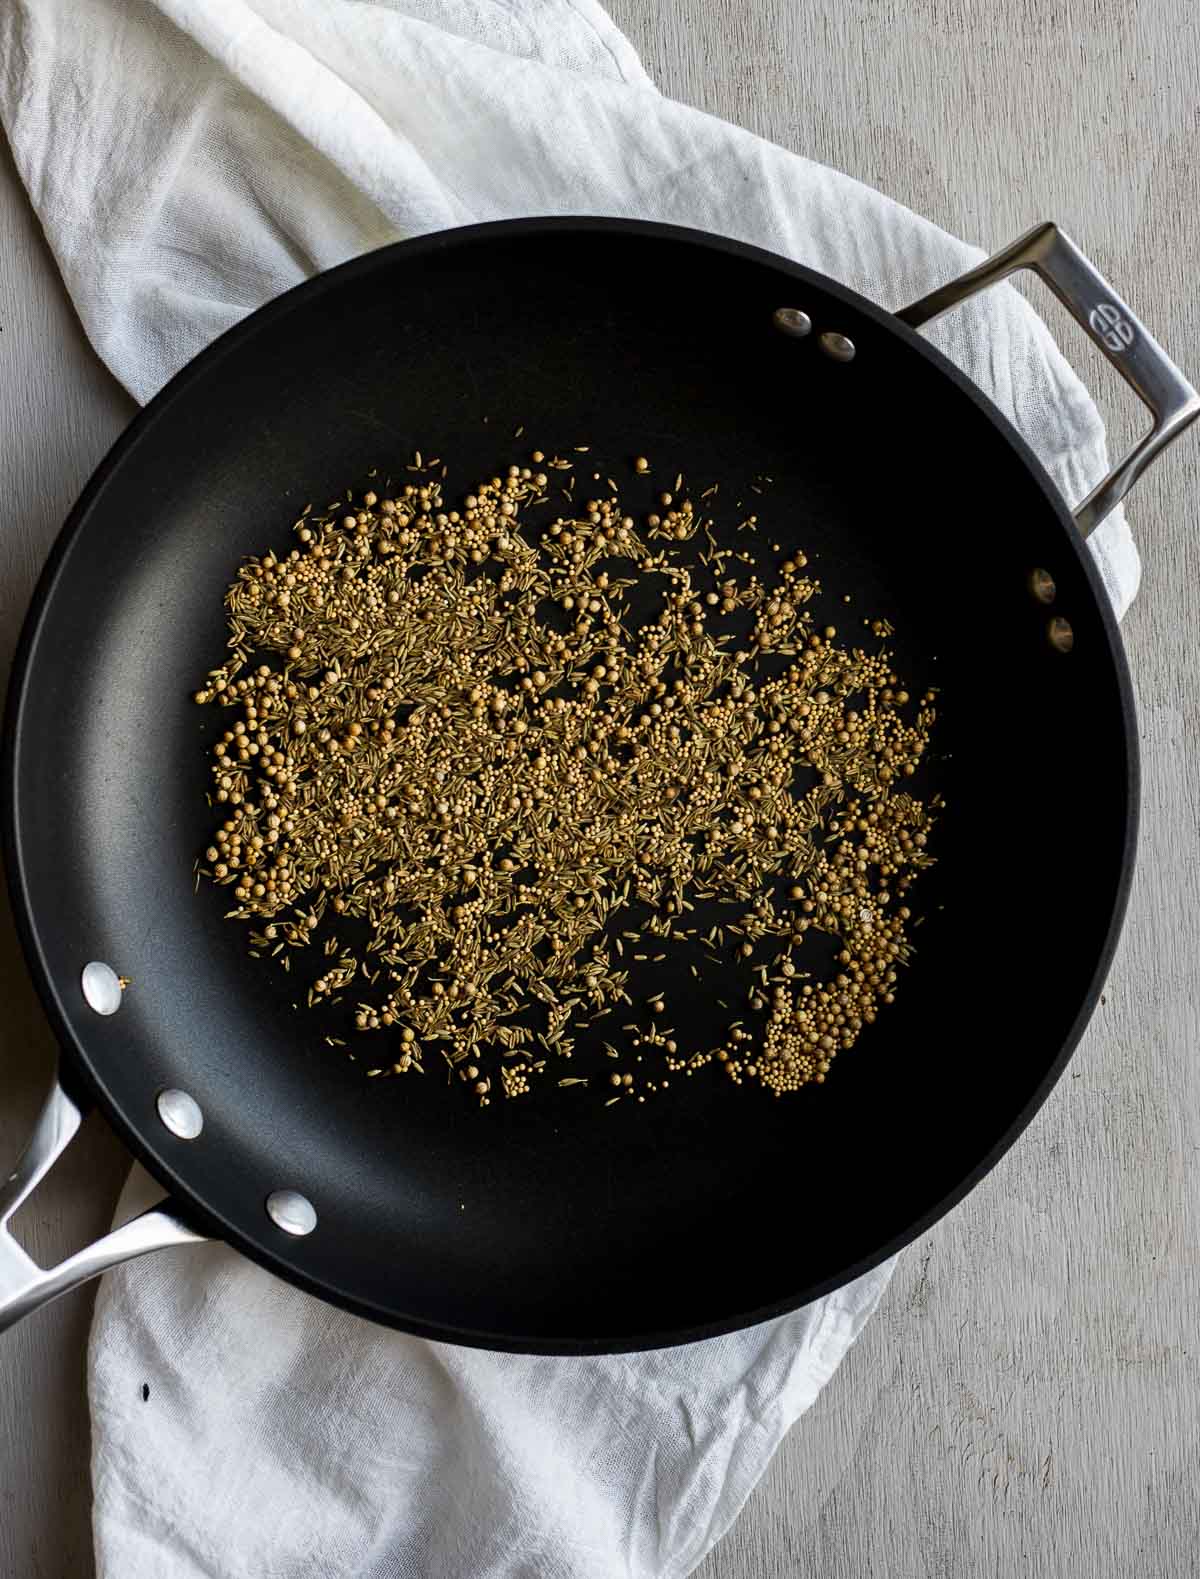 Toasted spices in a skillet.